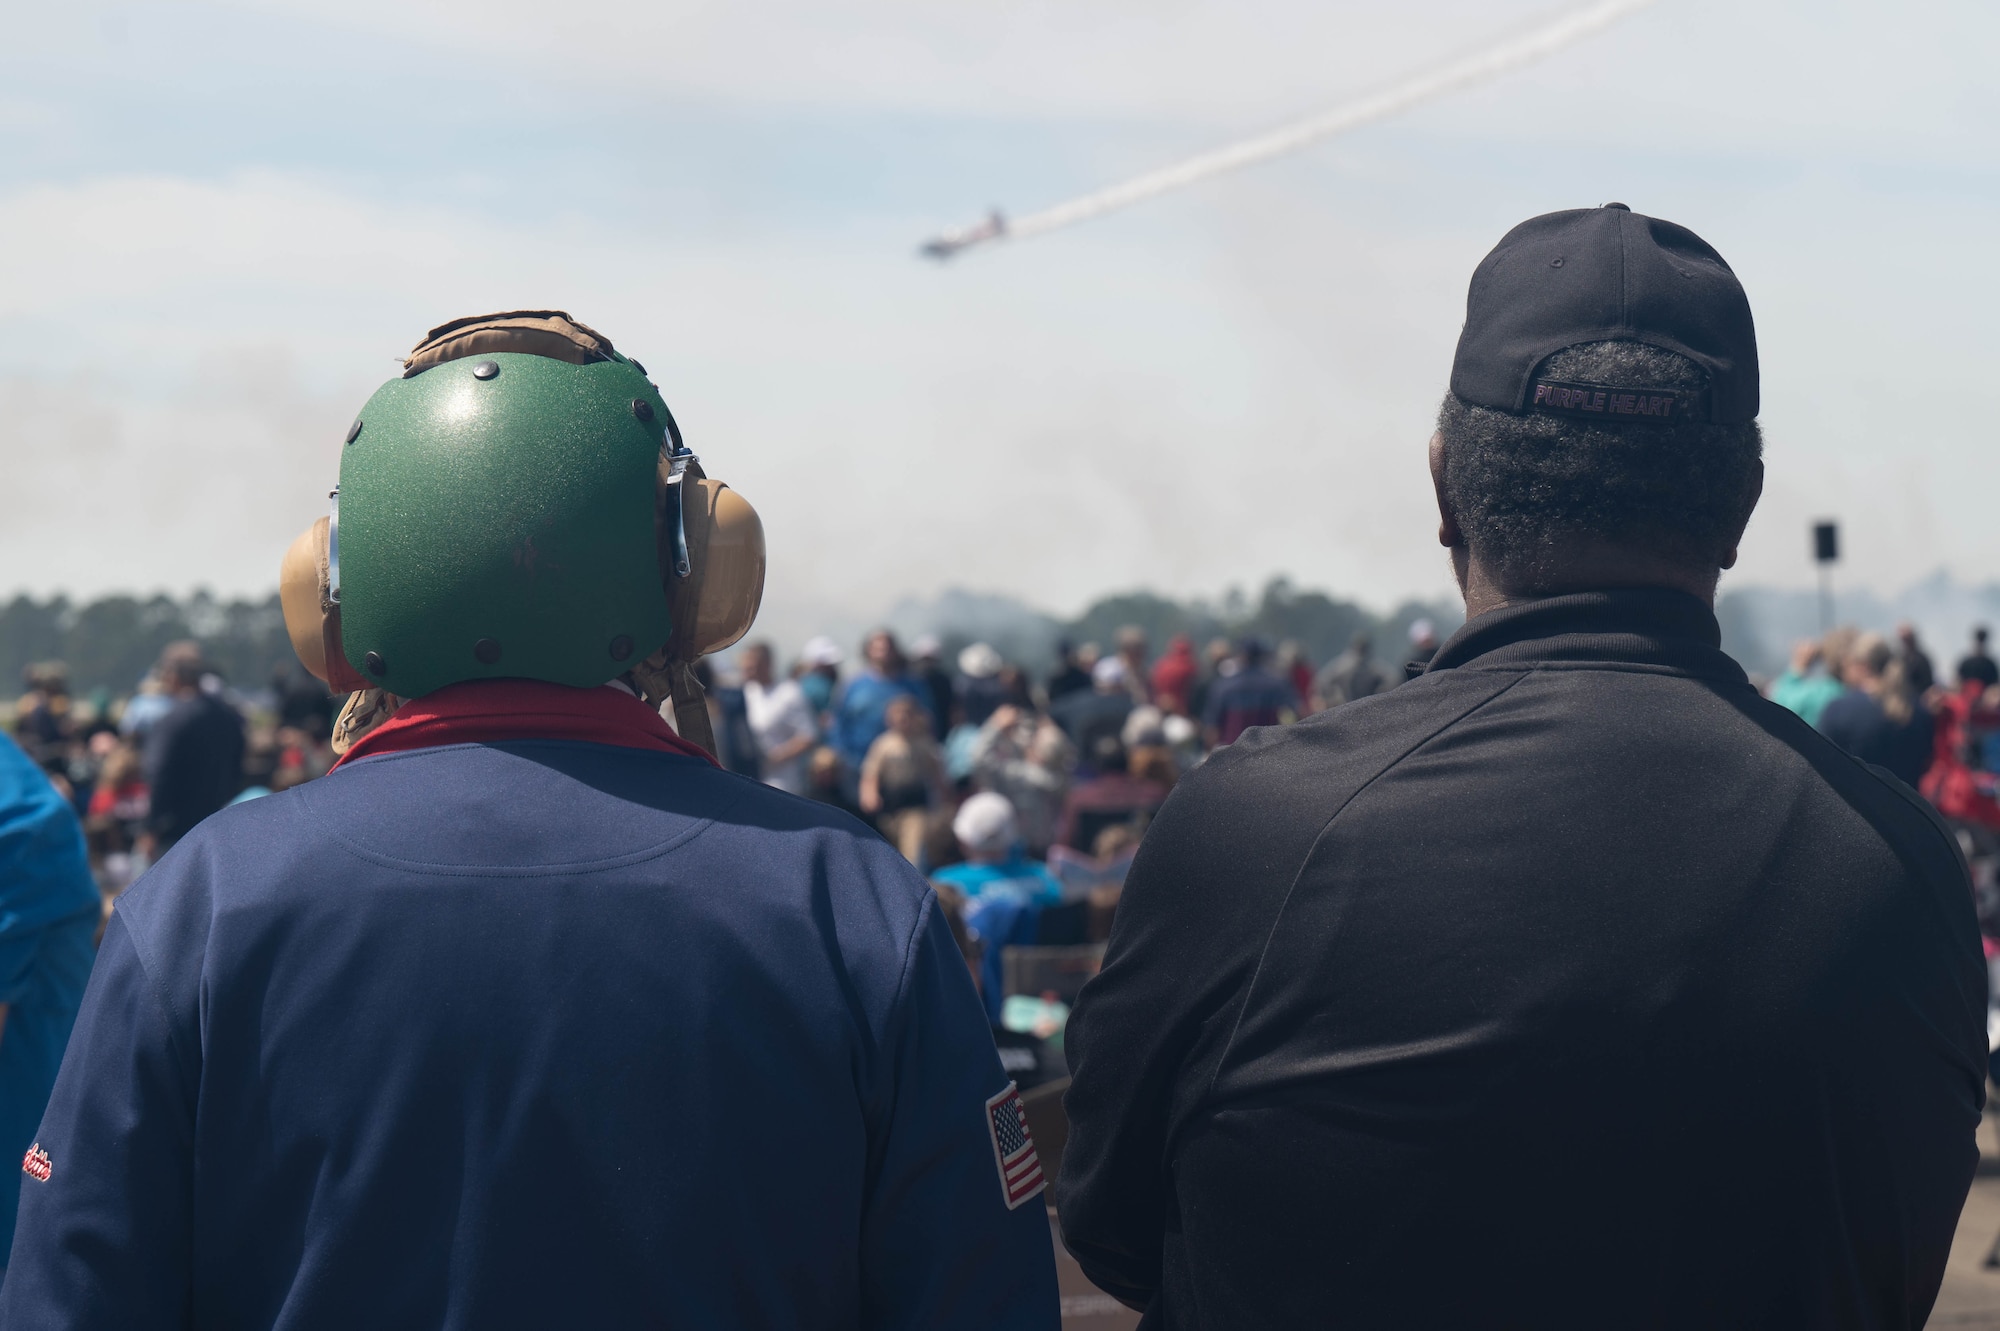 Two veterans watch as a plane descends from the sky during the Beyond the Horizon Air and Space Show at Maxwell Air Force Base, Ala. April 6, 2024. In addition to aerial performances, the event also featured ground displays of various aircraft, interactive exhibits, and opportunities for attendees to meet with pilots and aircrew members, providing a behind-the-scenes look at the technology and personnel that make air and space operations possible. (U.S. Air Force photo by A1C Tyrique Barquet)